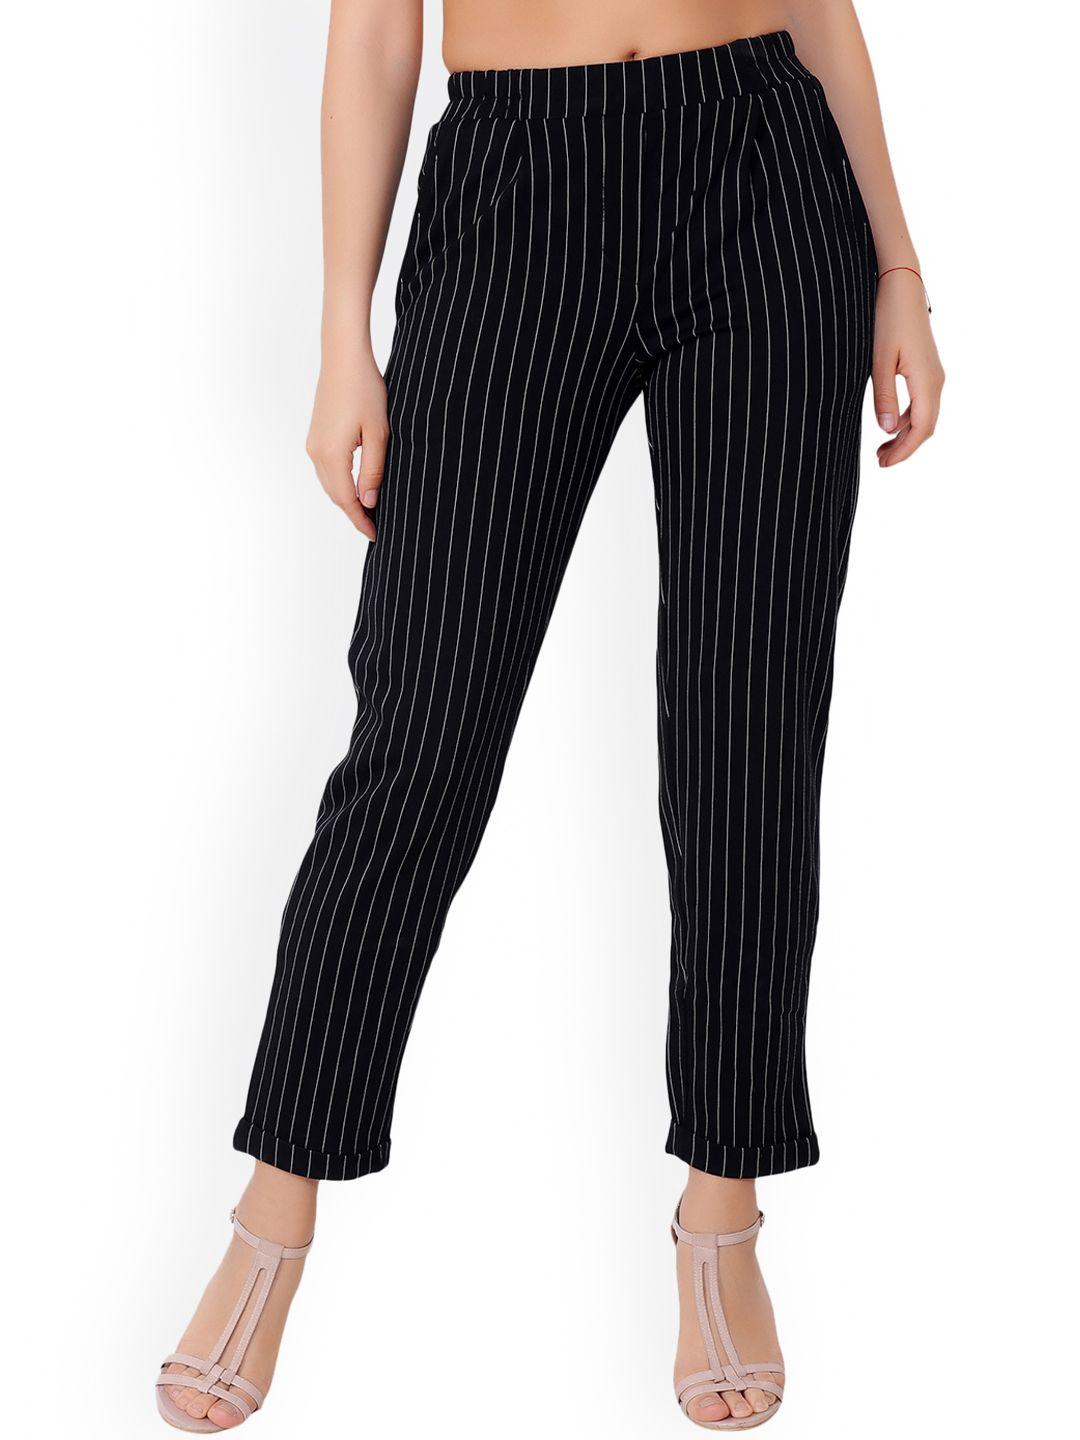 cation women black striped culottes